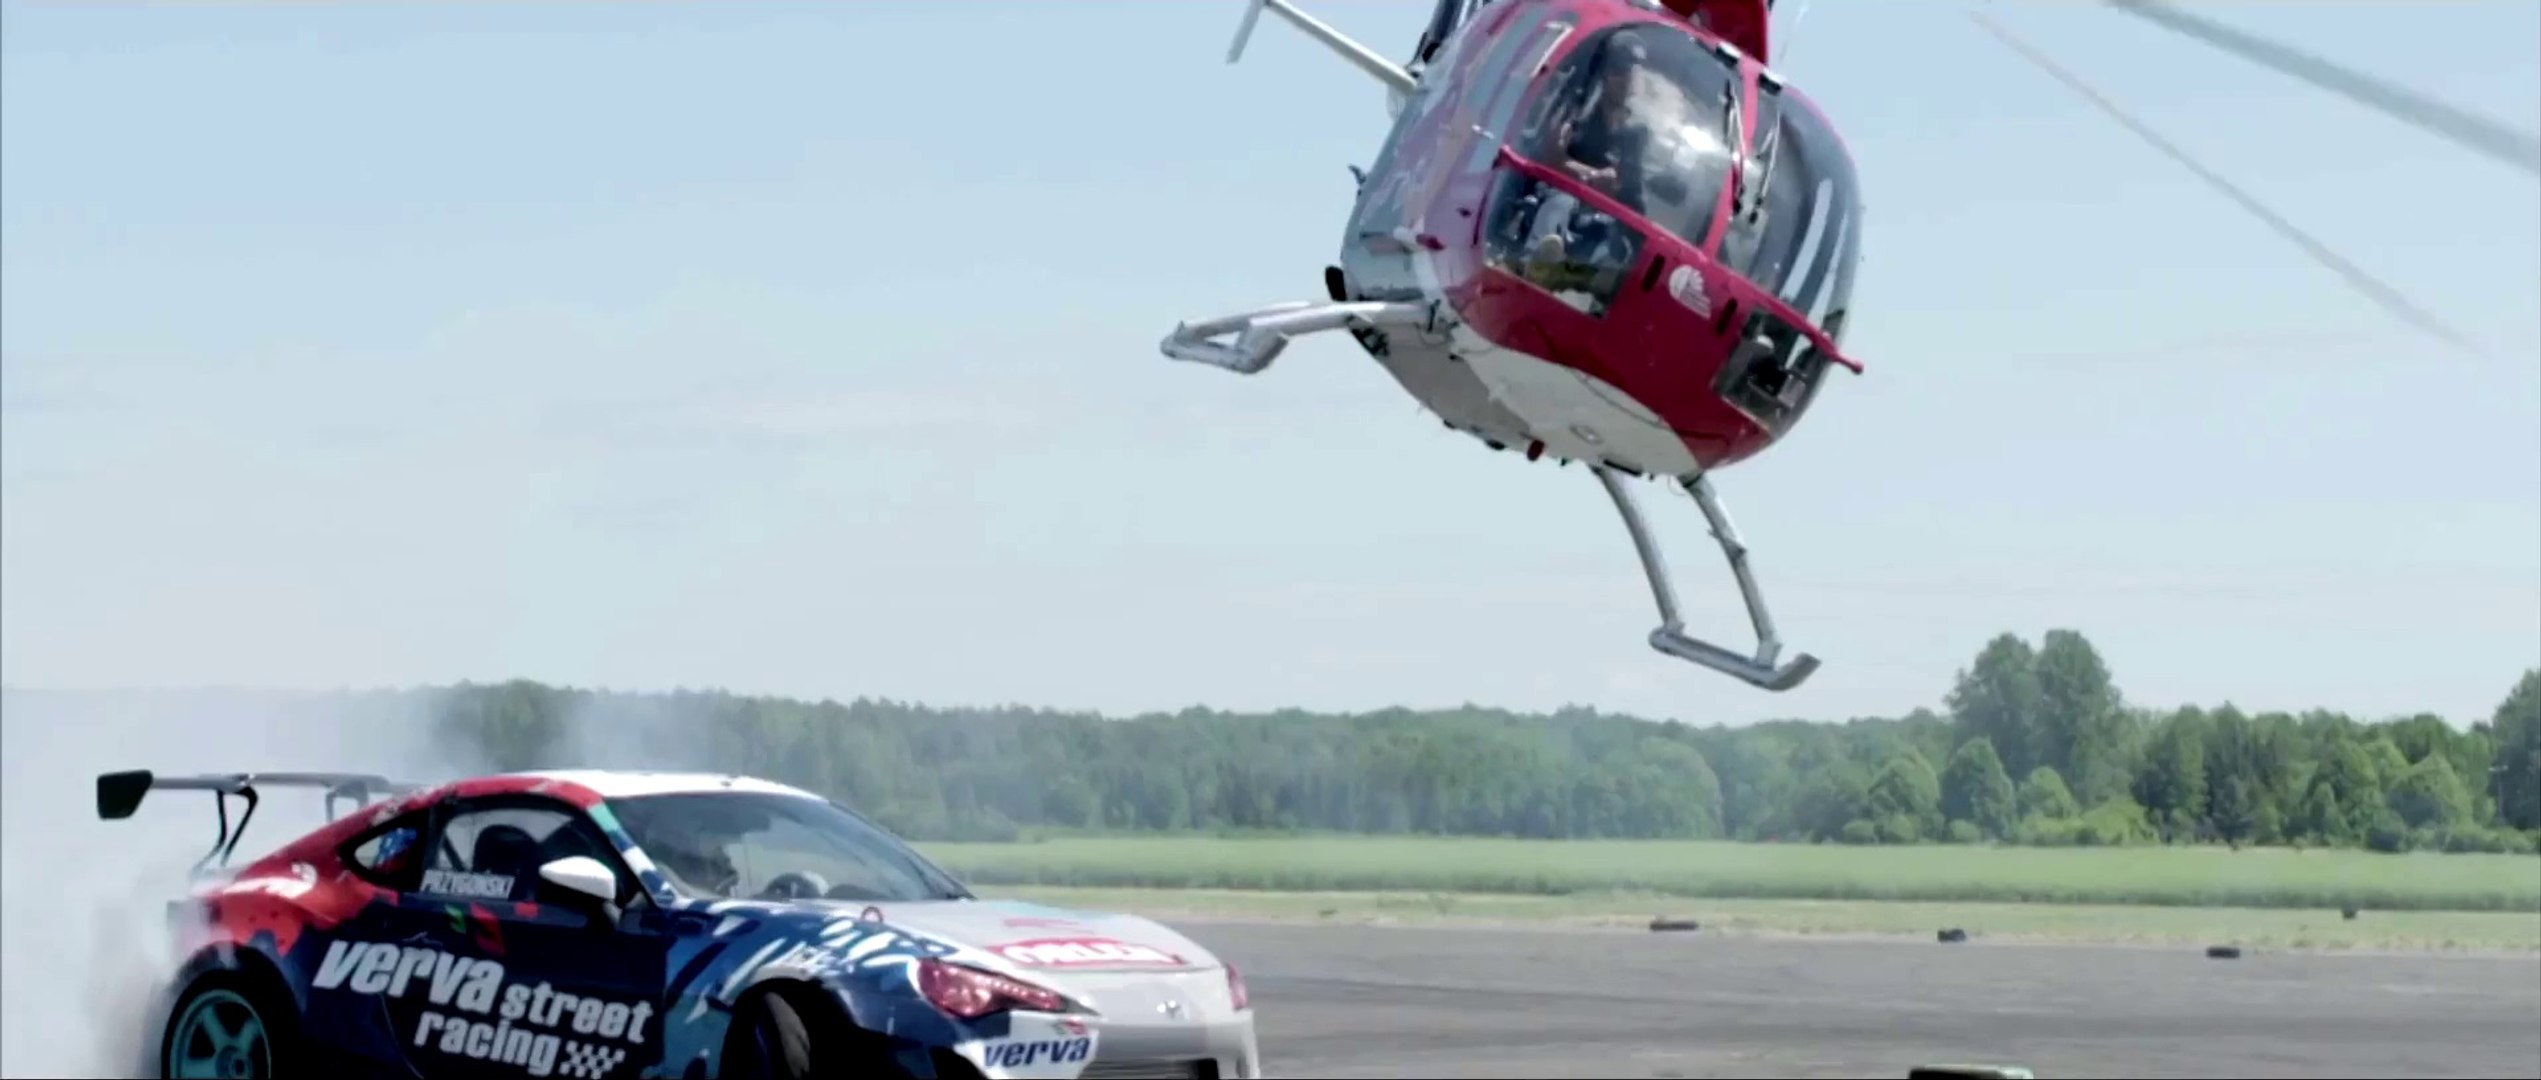 Helicopter closely chases a race car in this insane stunt - Vidéo Dailymotion